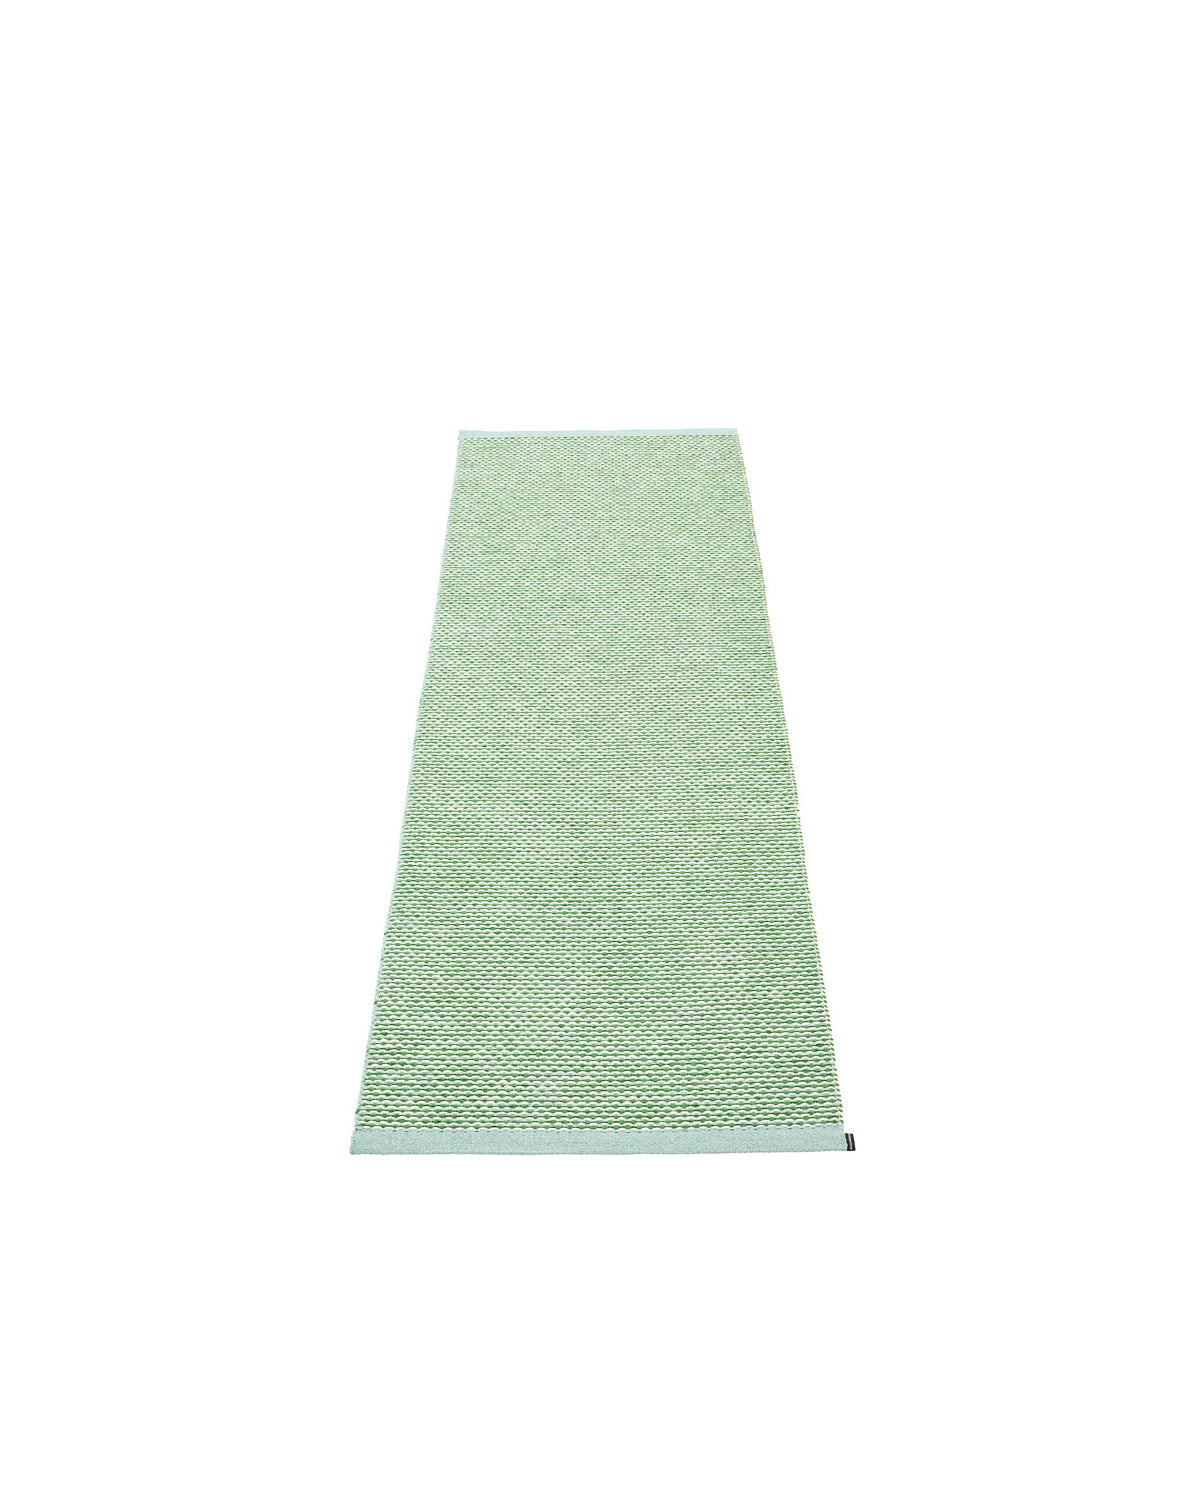 Pappelina Rug EFFI Pale Turquoise  image 1